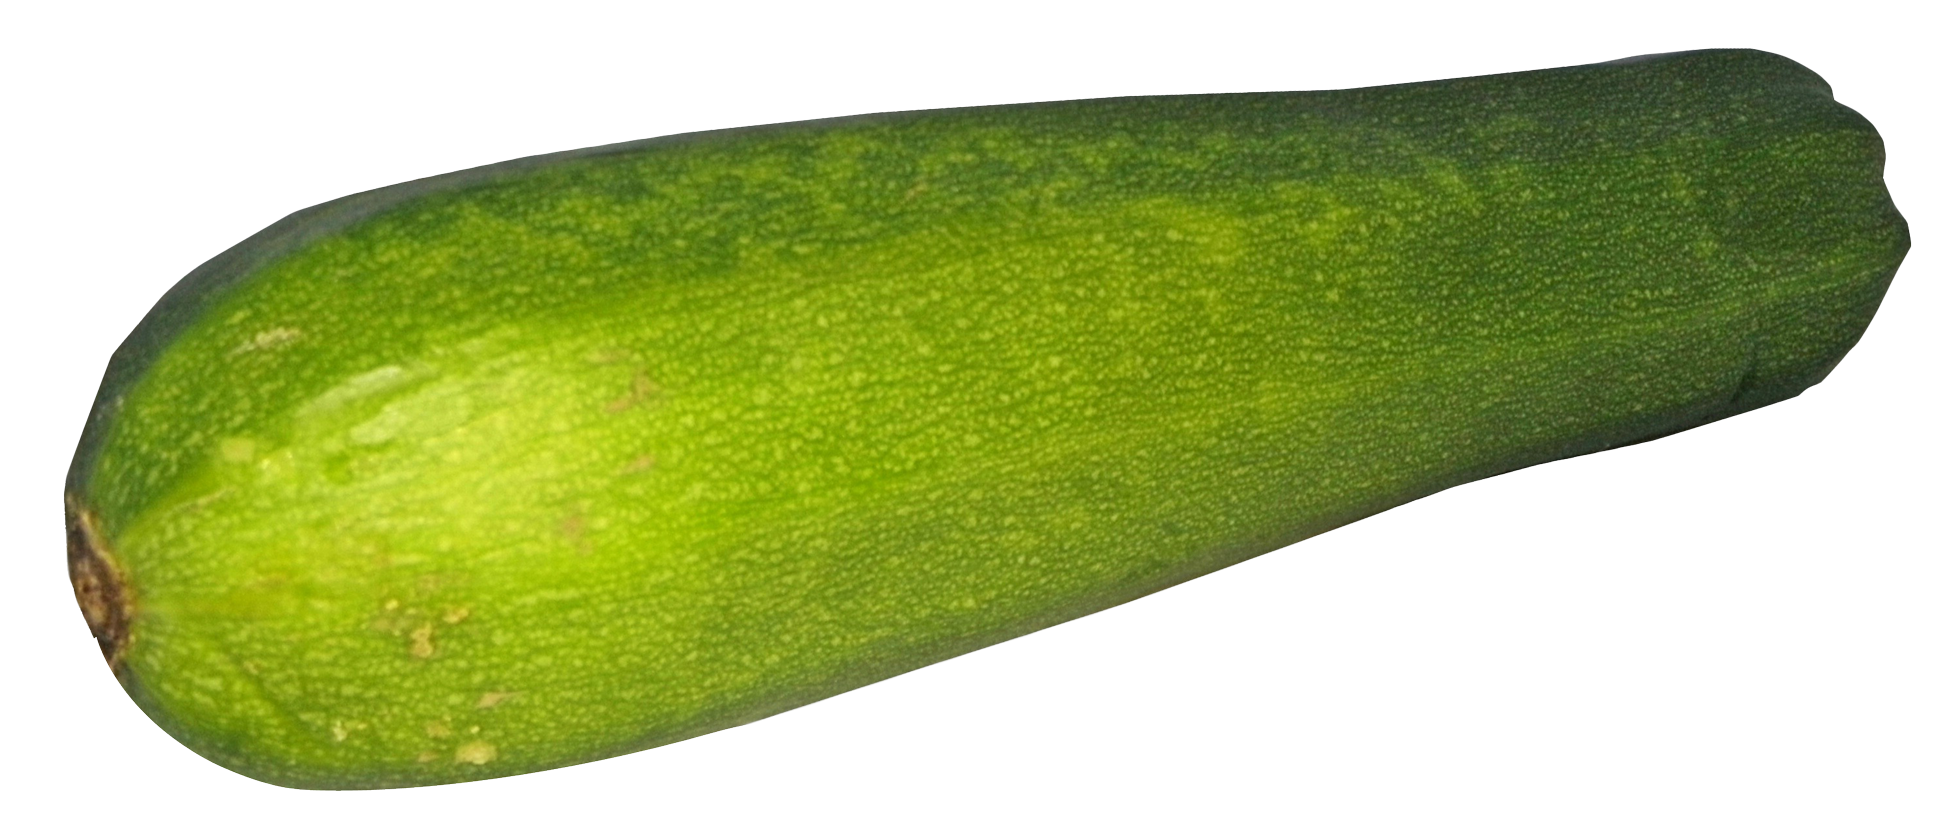 Vegetables clipart winter. Zucchini png image purepng